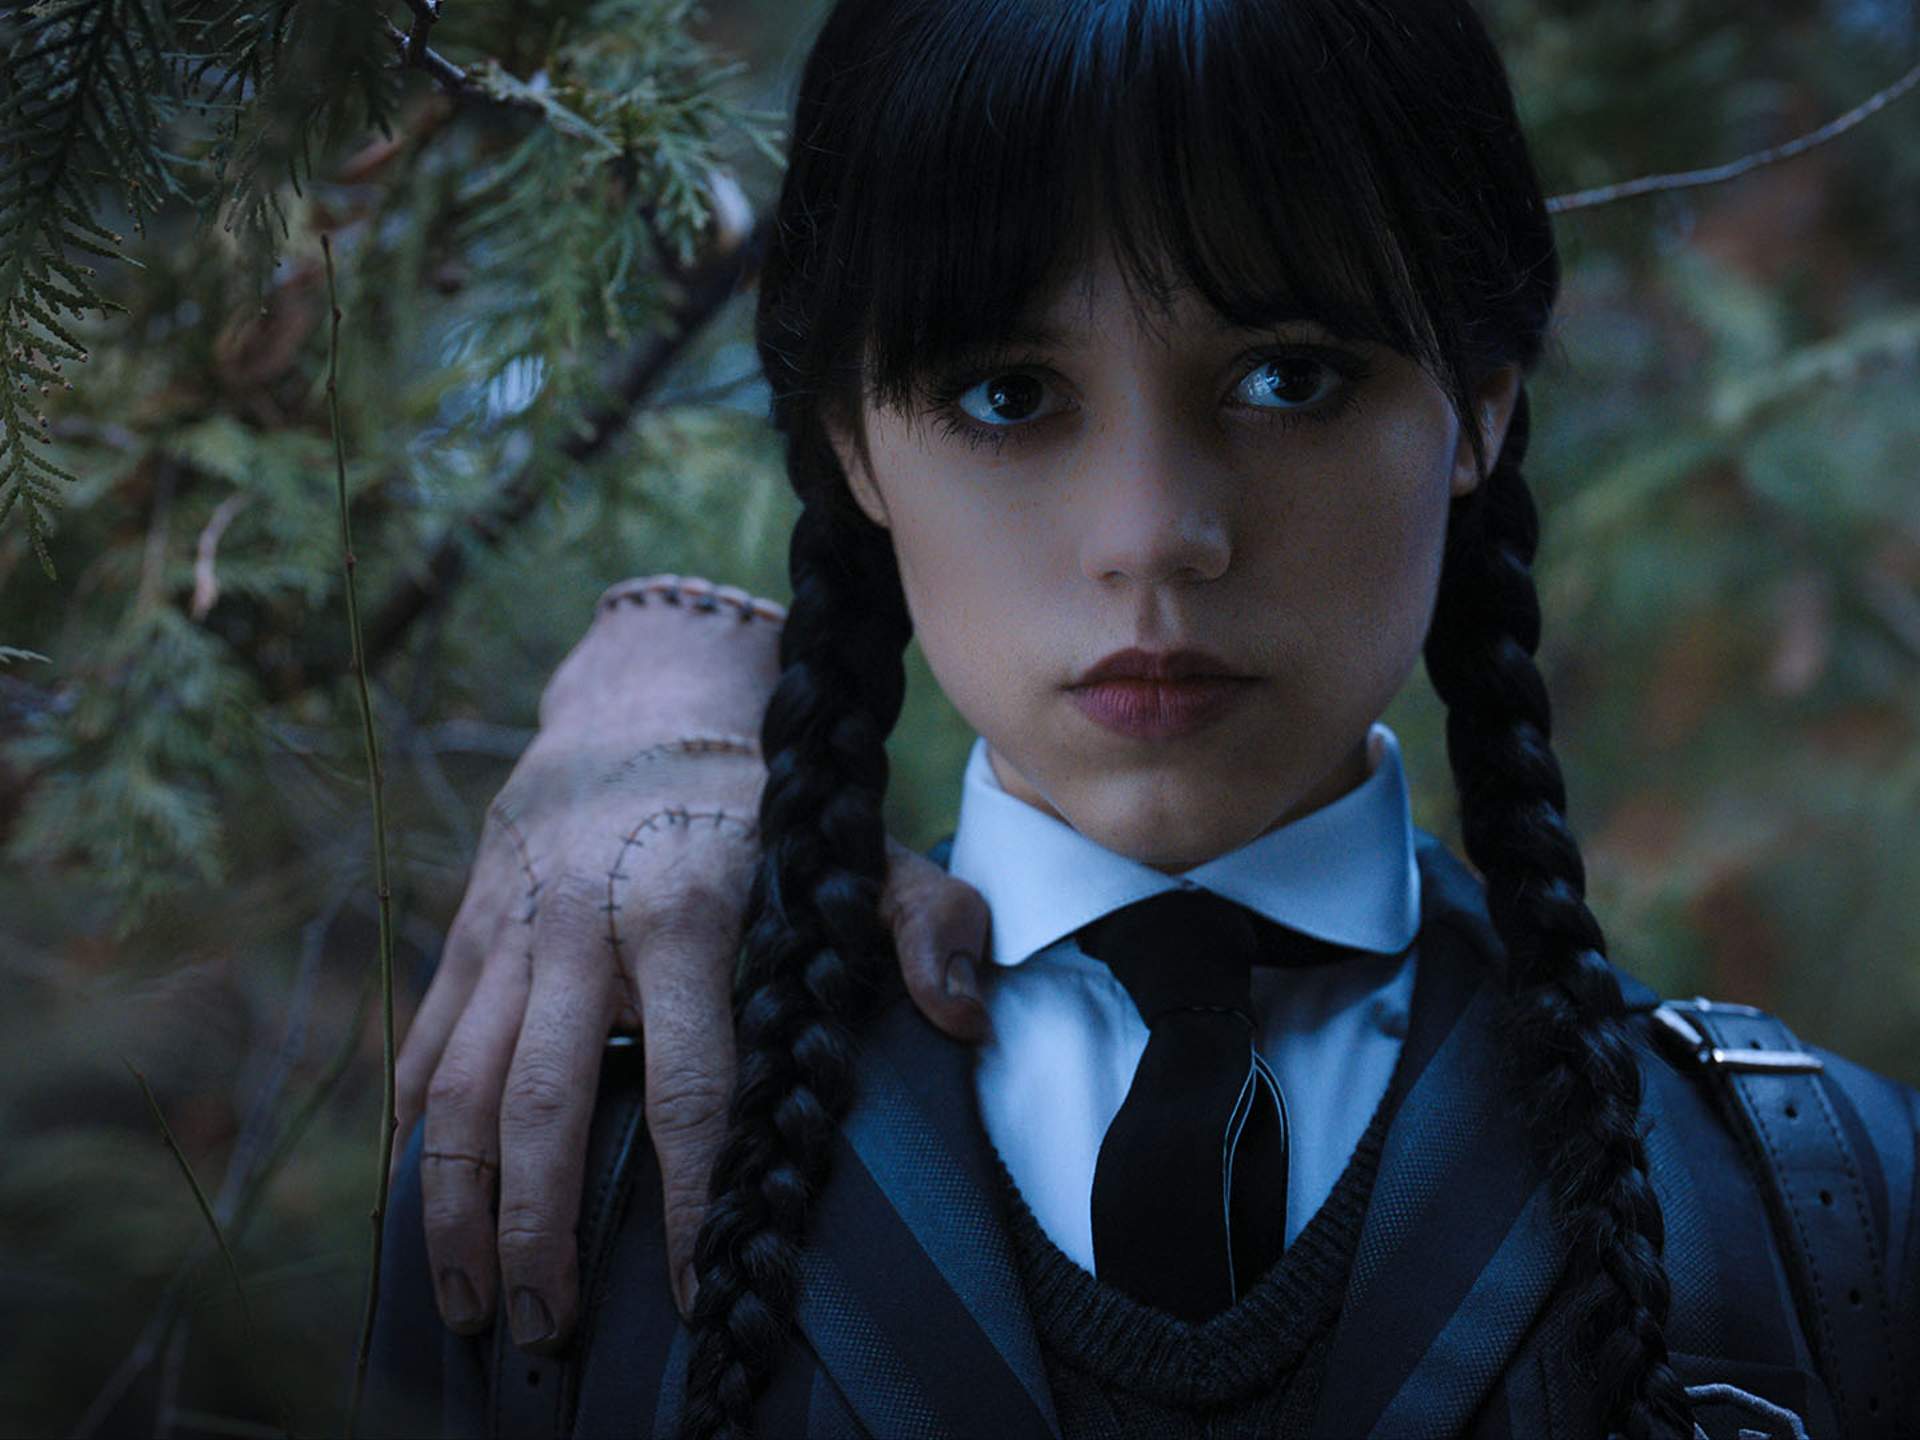 Wednesday Addams from the series Wednesday - Playground